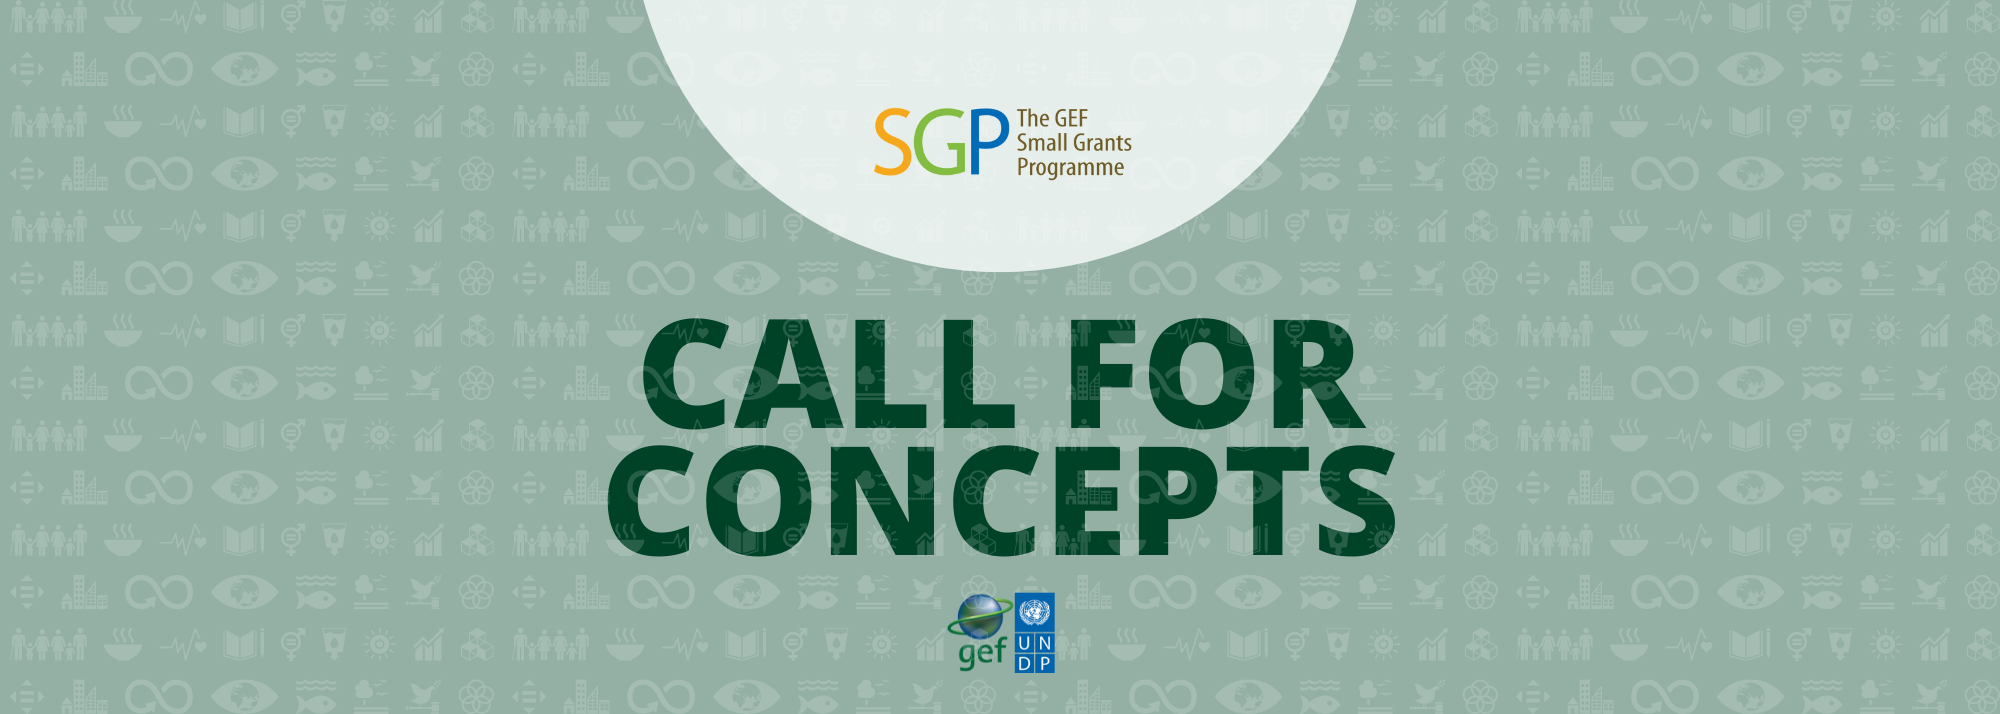 A header for the GEF-SGP Call for Concepts 2022